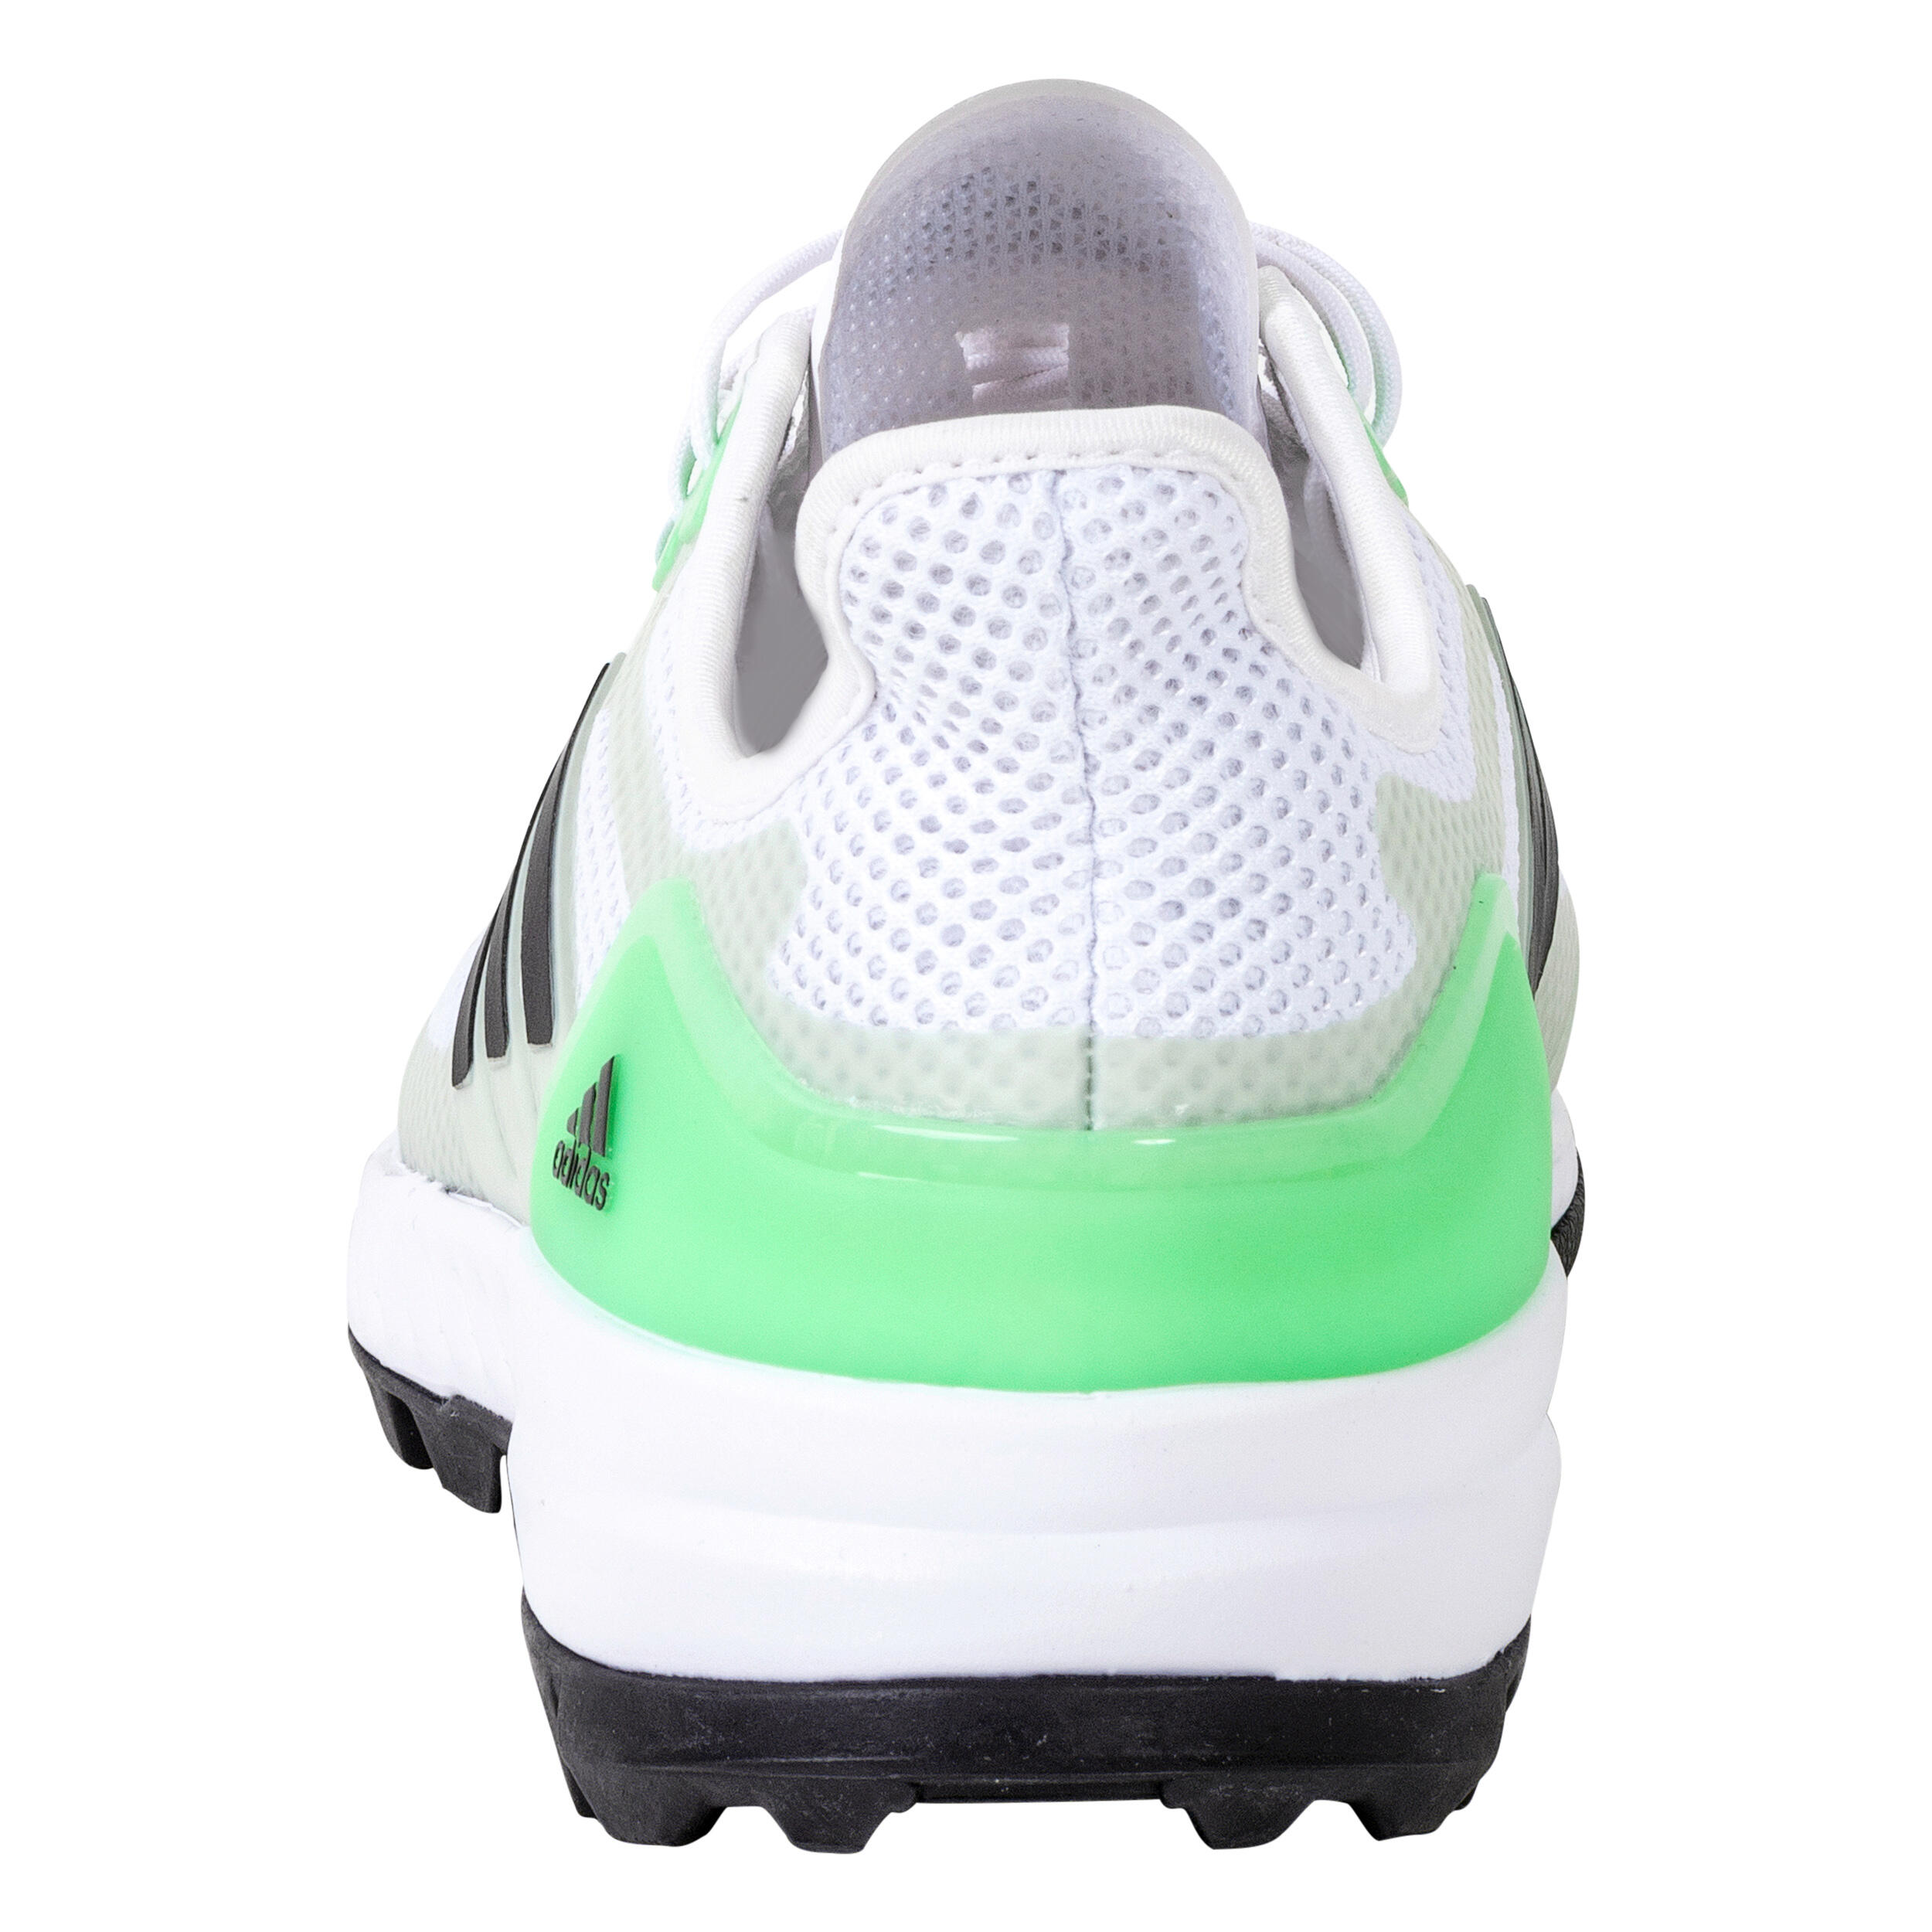 Adult High-Intensity Field Hockey Shoes Adipower - White 5/7